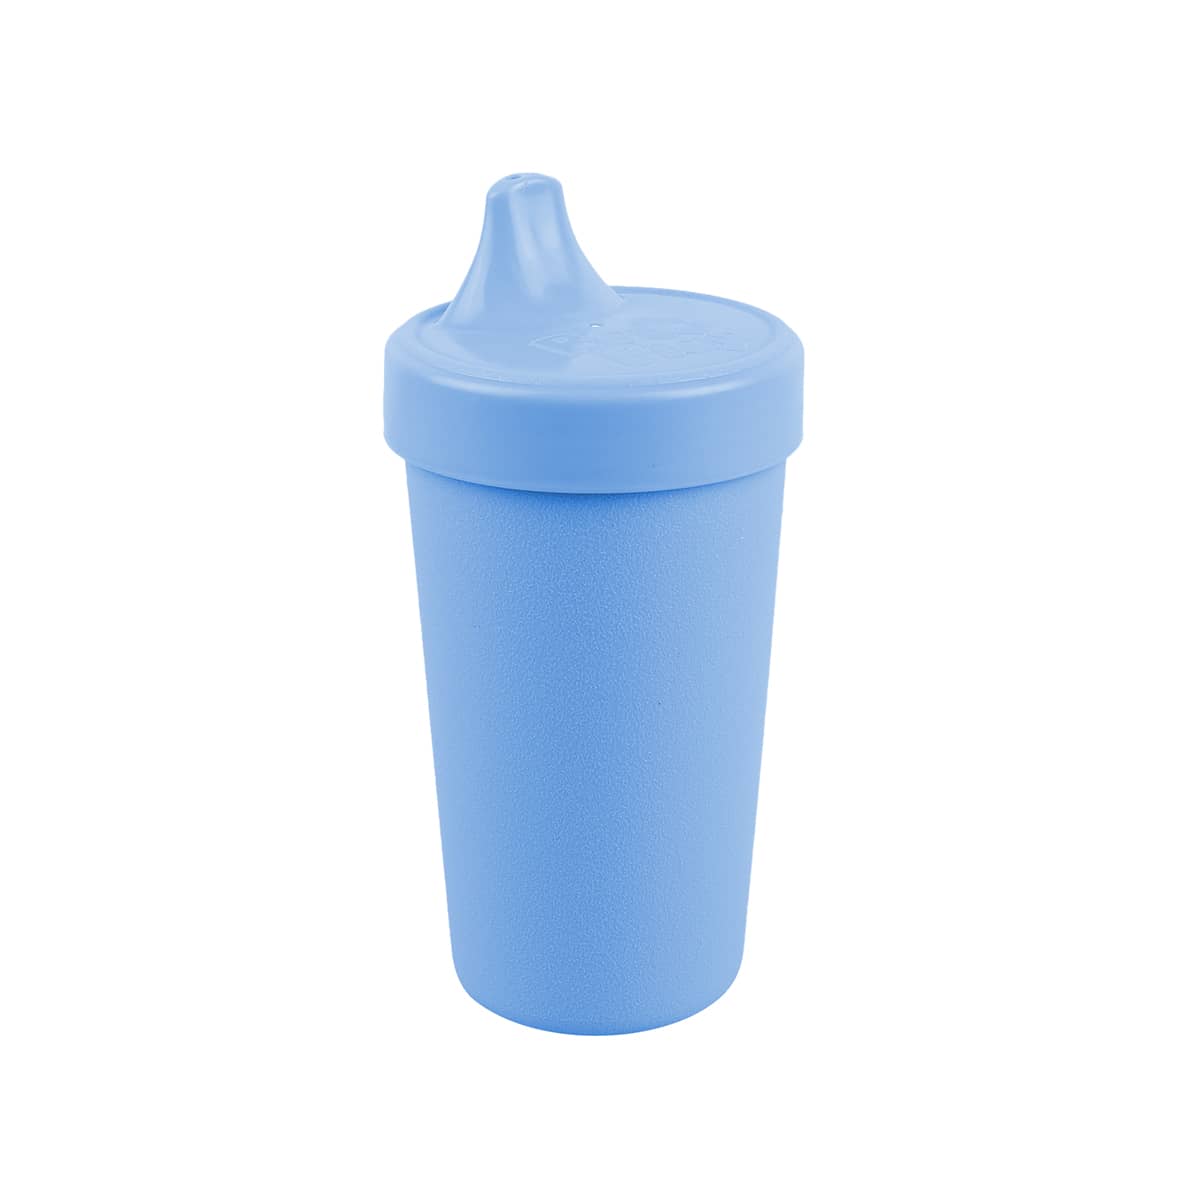 Re-Play Recycled No-Spill Sippy Cup - Denim